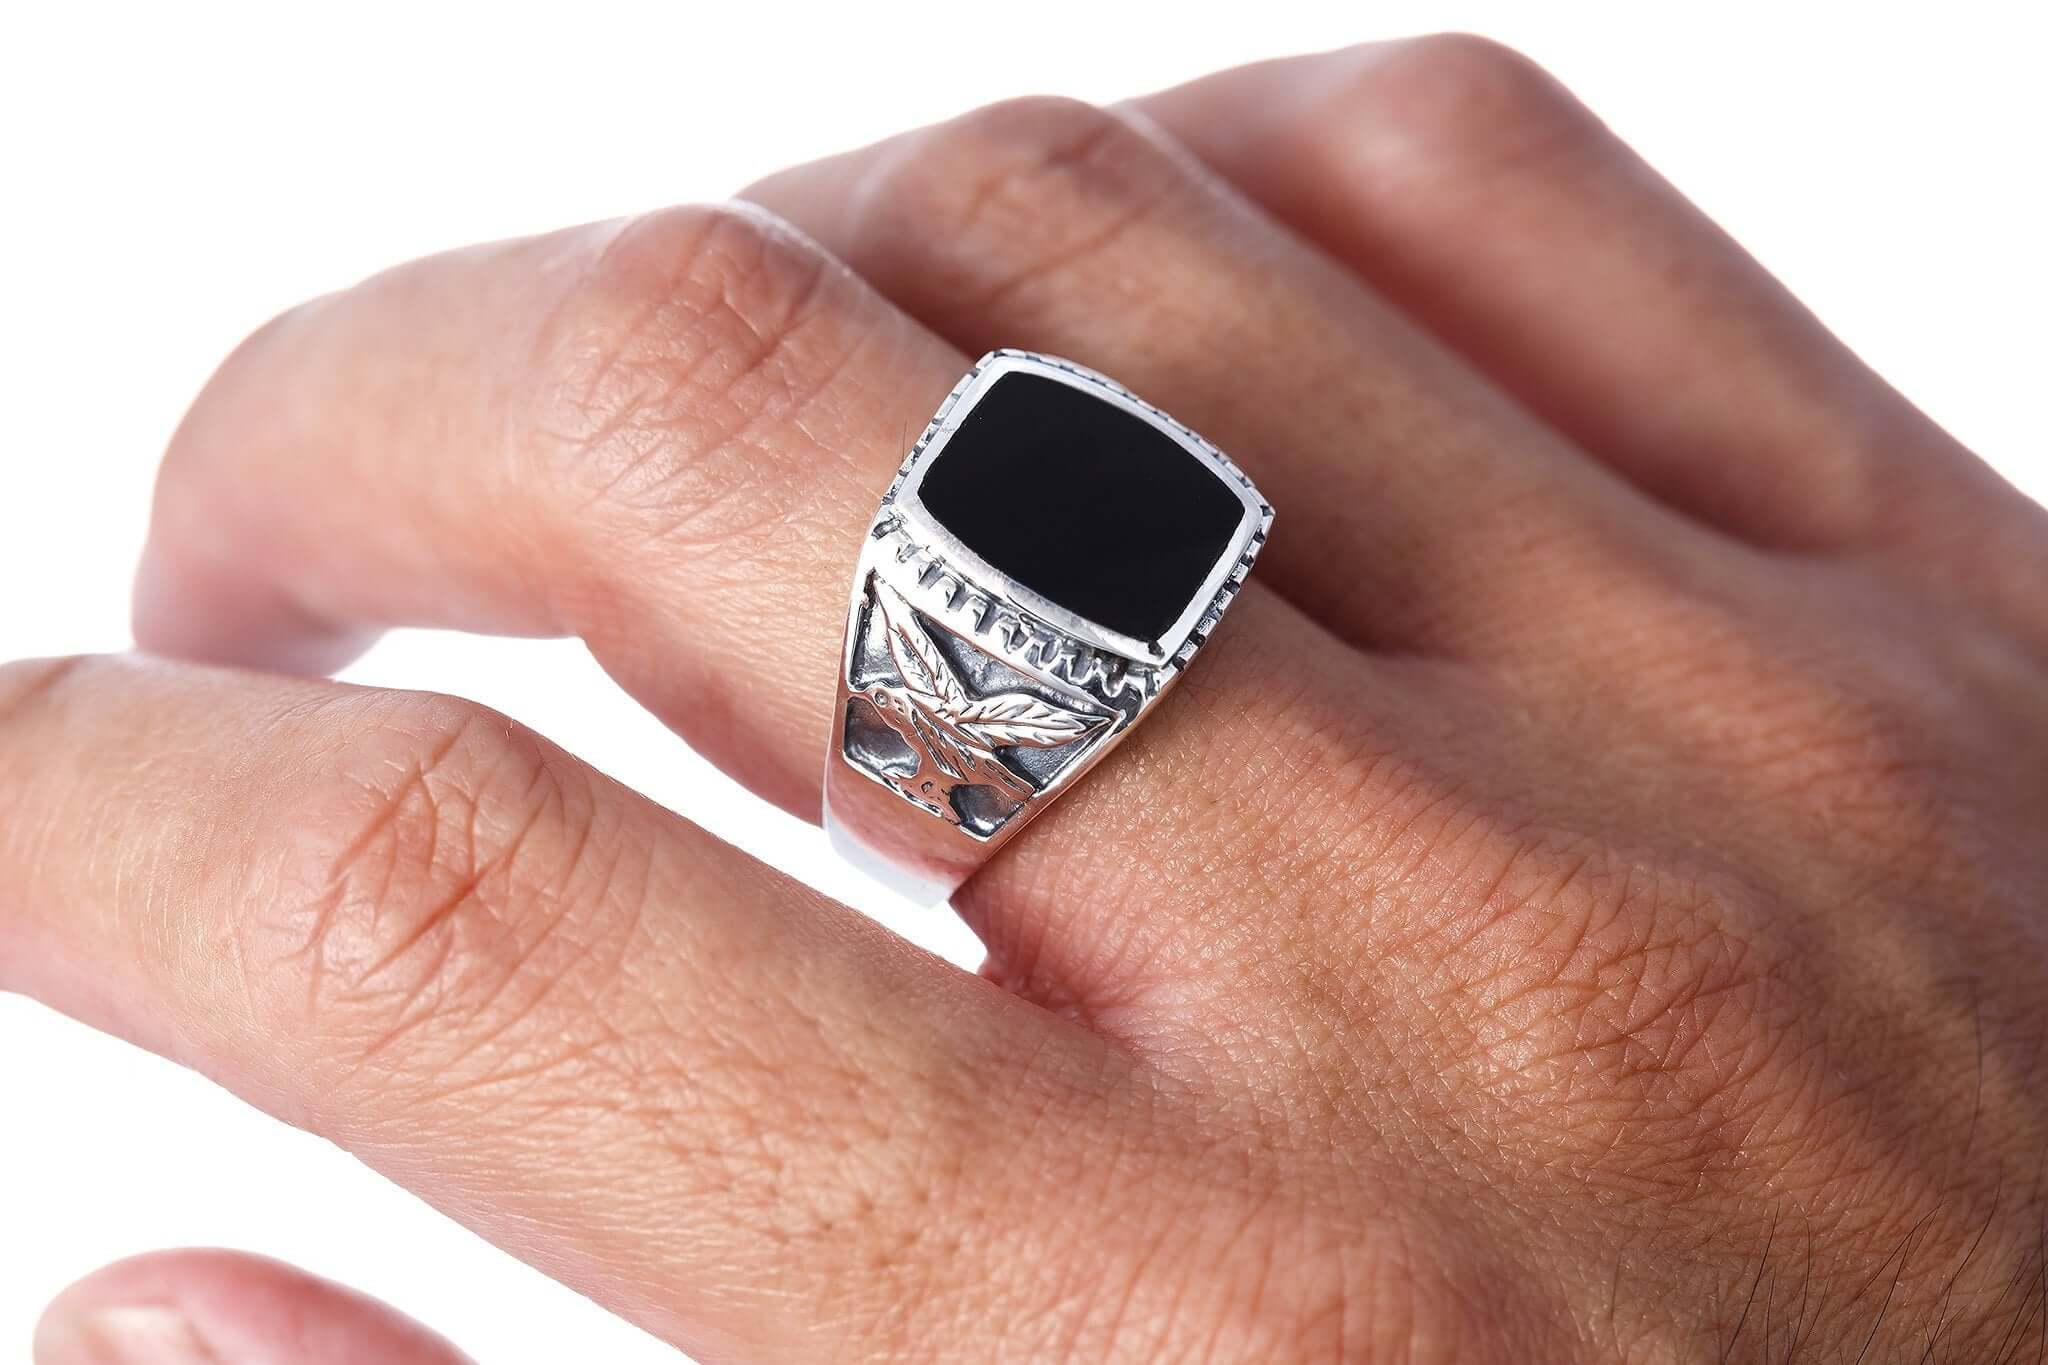 Big Black Onyx Ring. Wholesale Sterling Silver Ring - 925Express